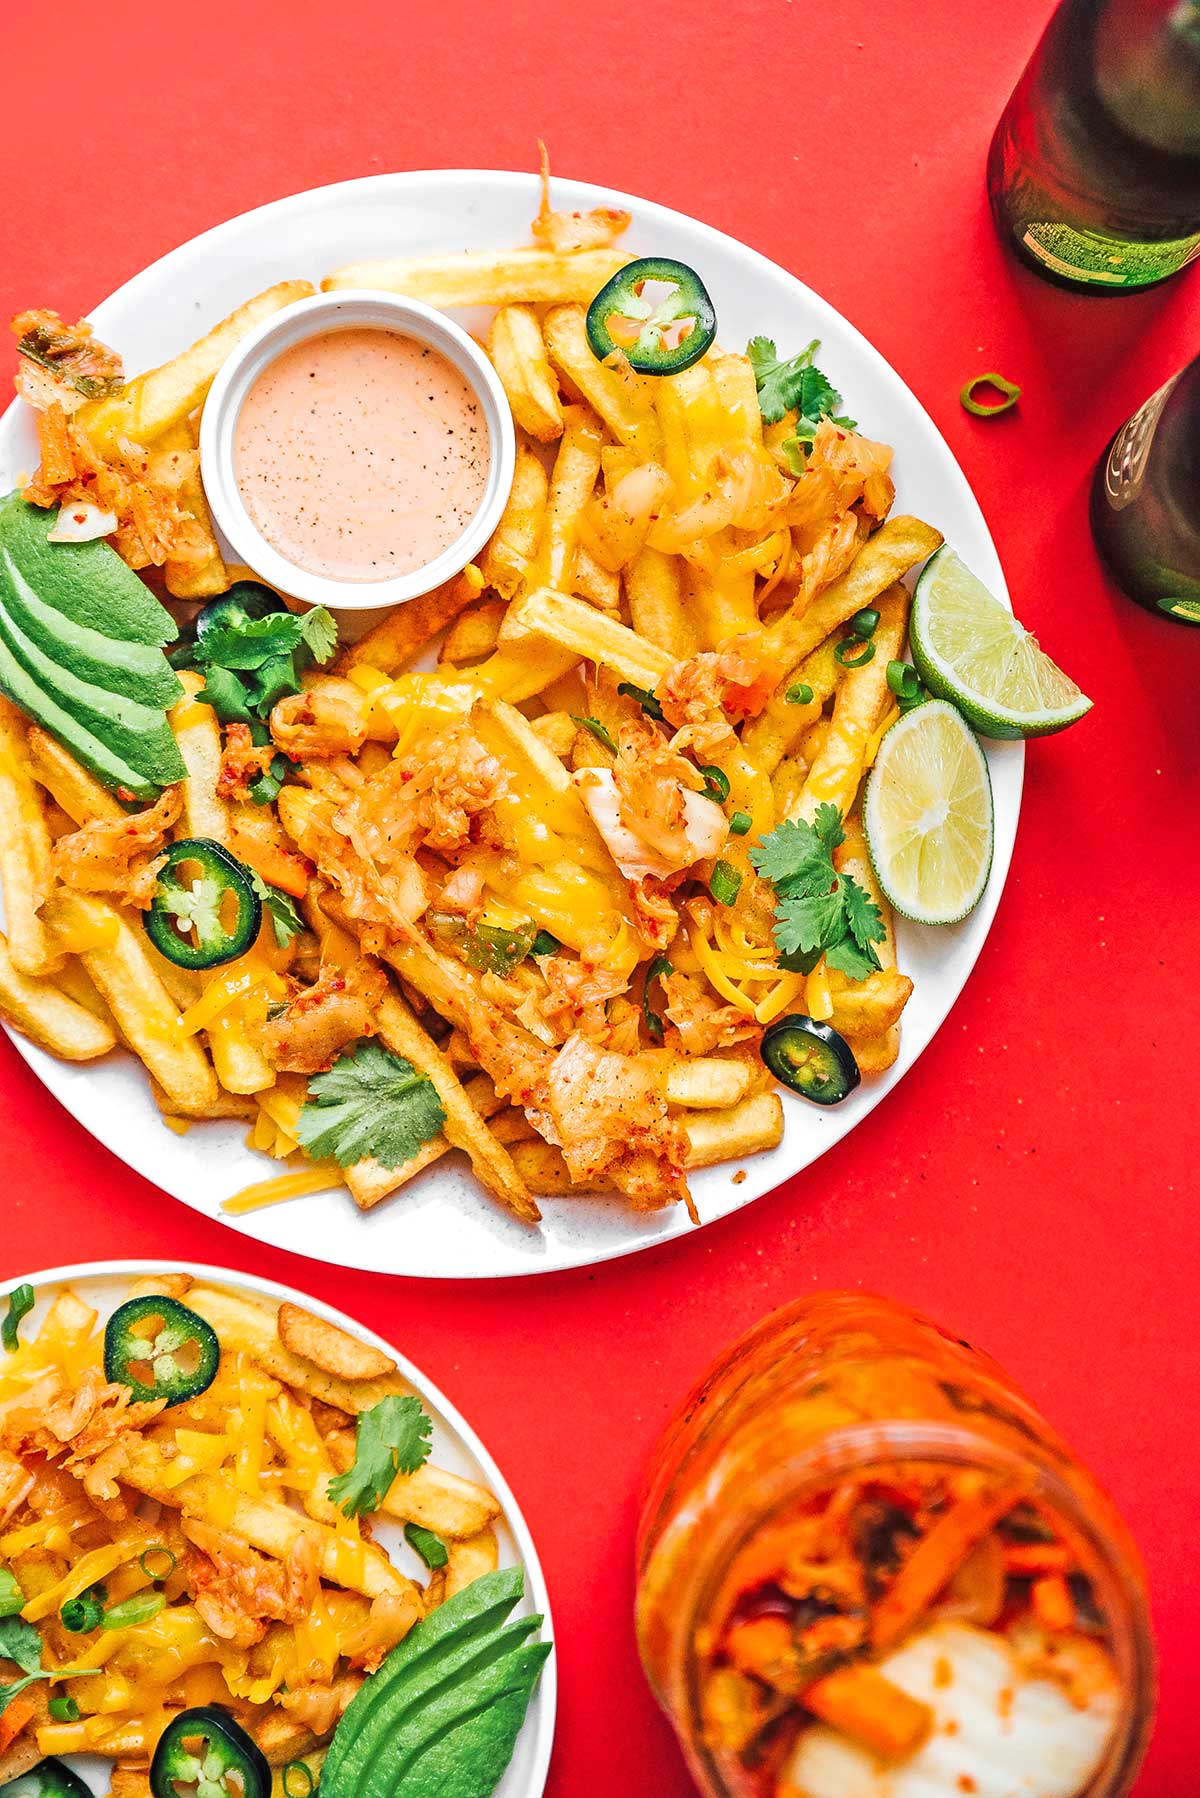 Kimchi fries, sauce, avocado slices, lime slices, and toppings on a plate on a red background